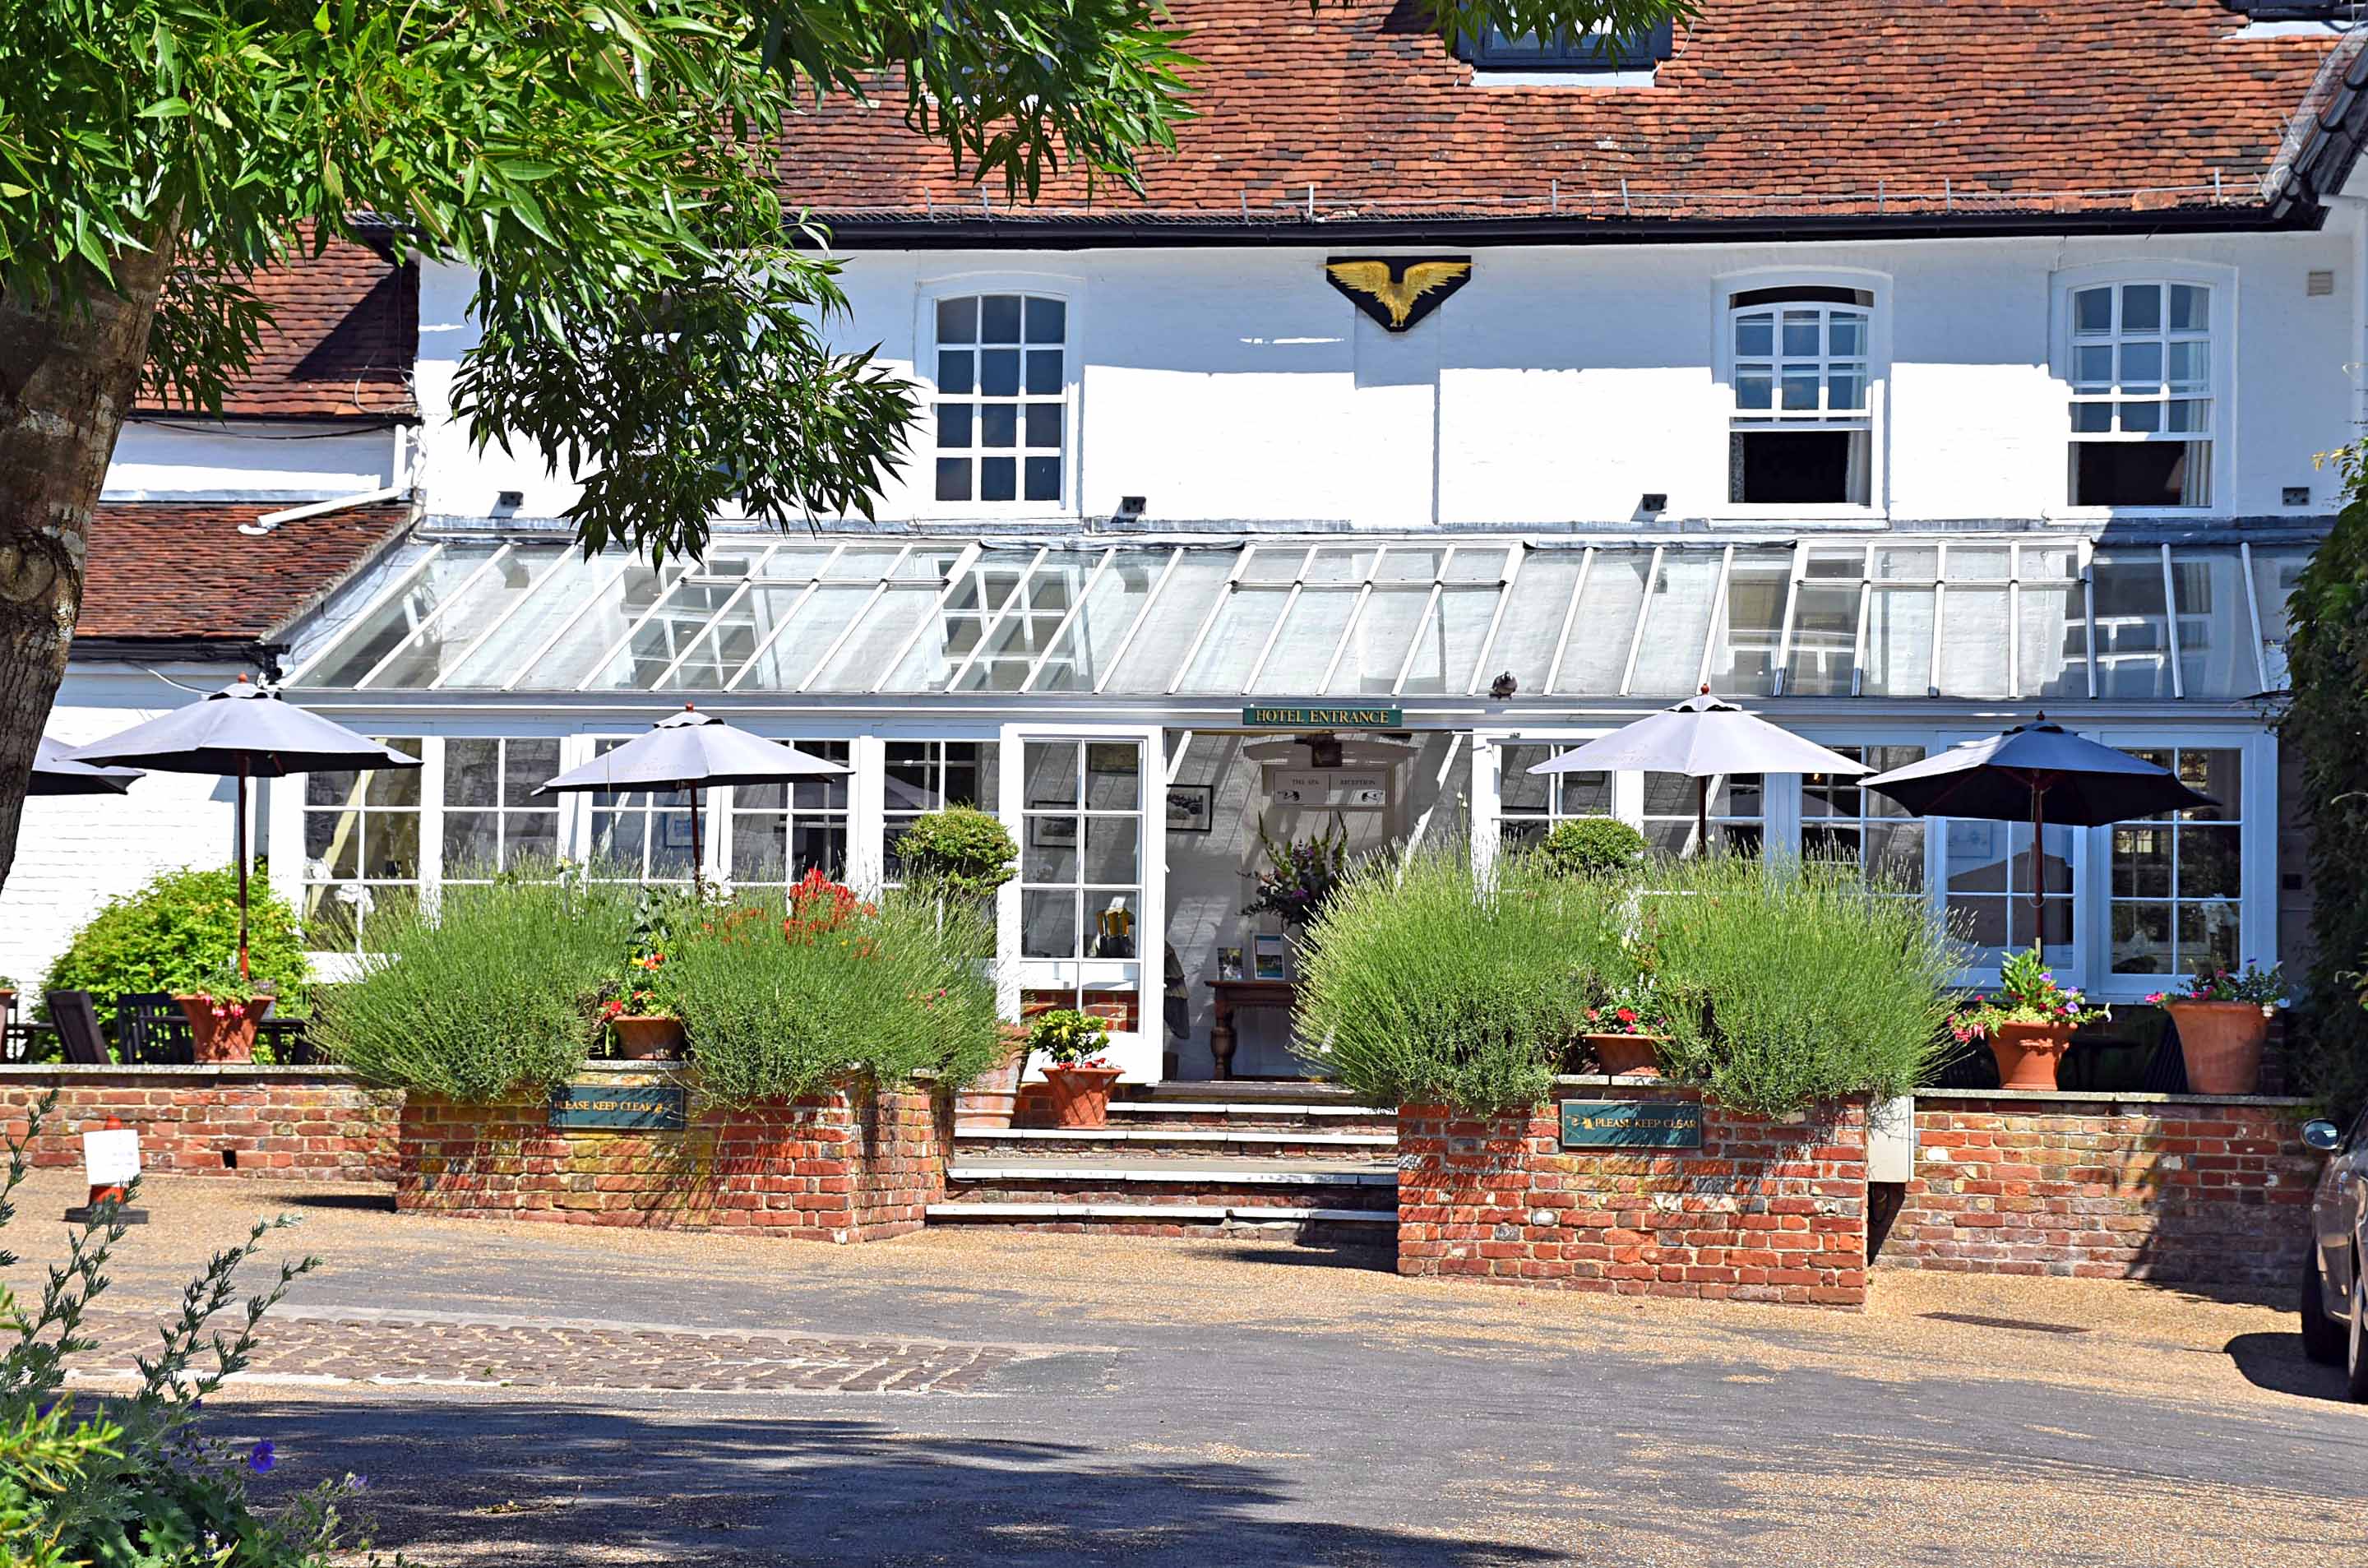 The Spread Eagle Hotel & Spa Review: A Charming Historical Stay in Midhurst, West Sussex